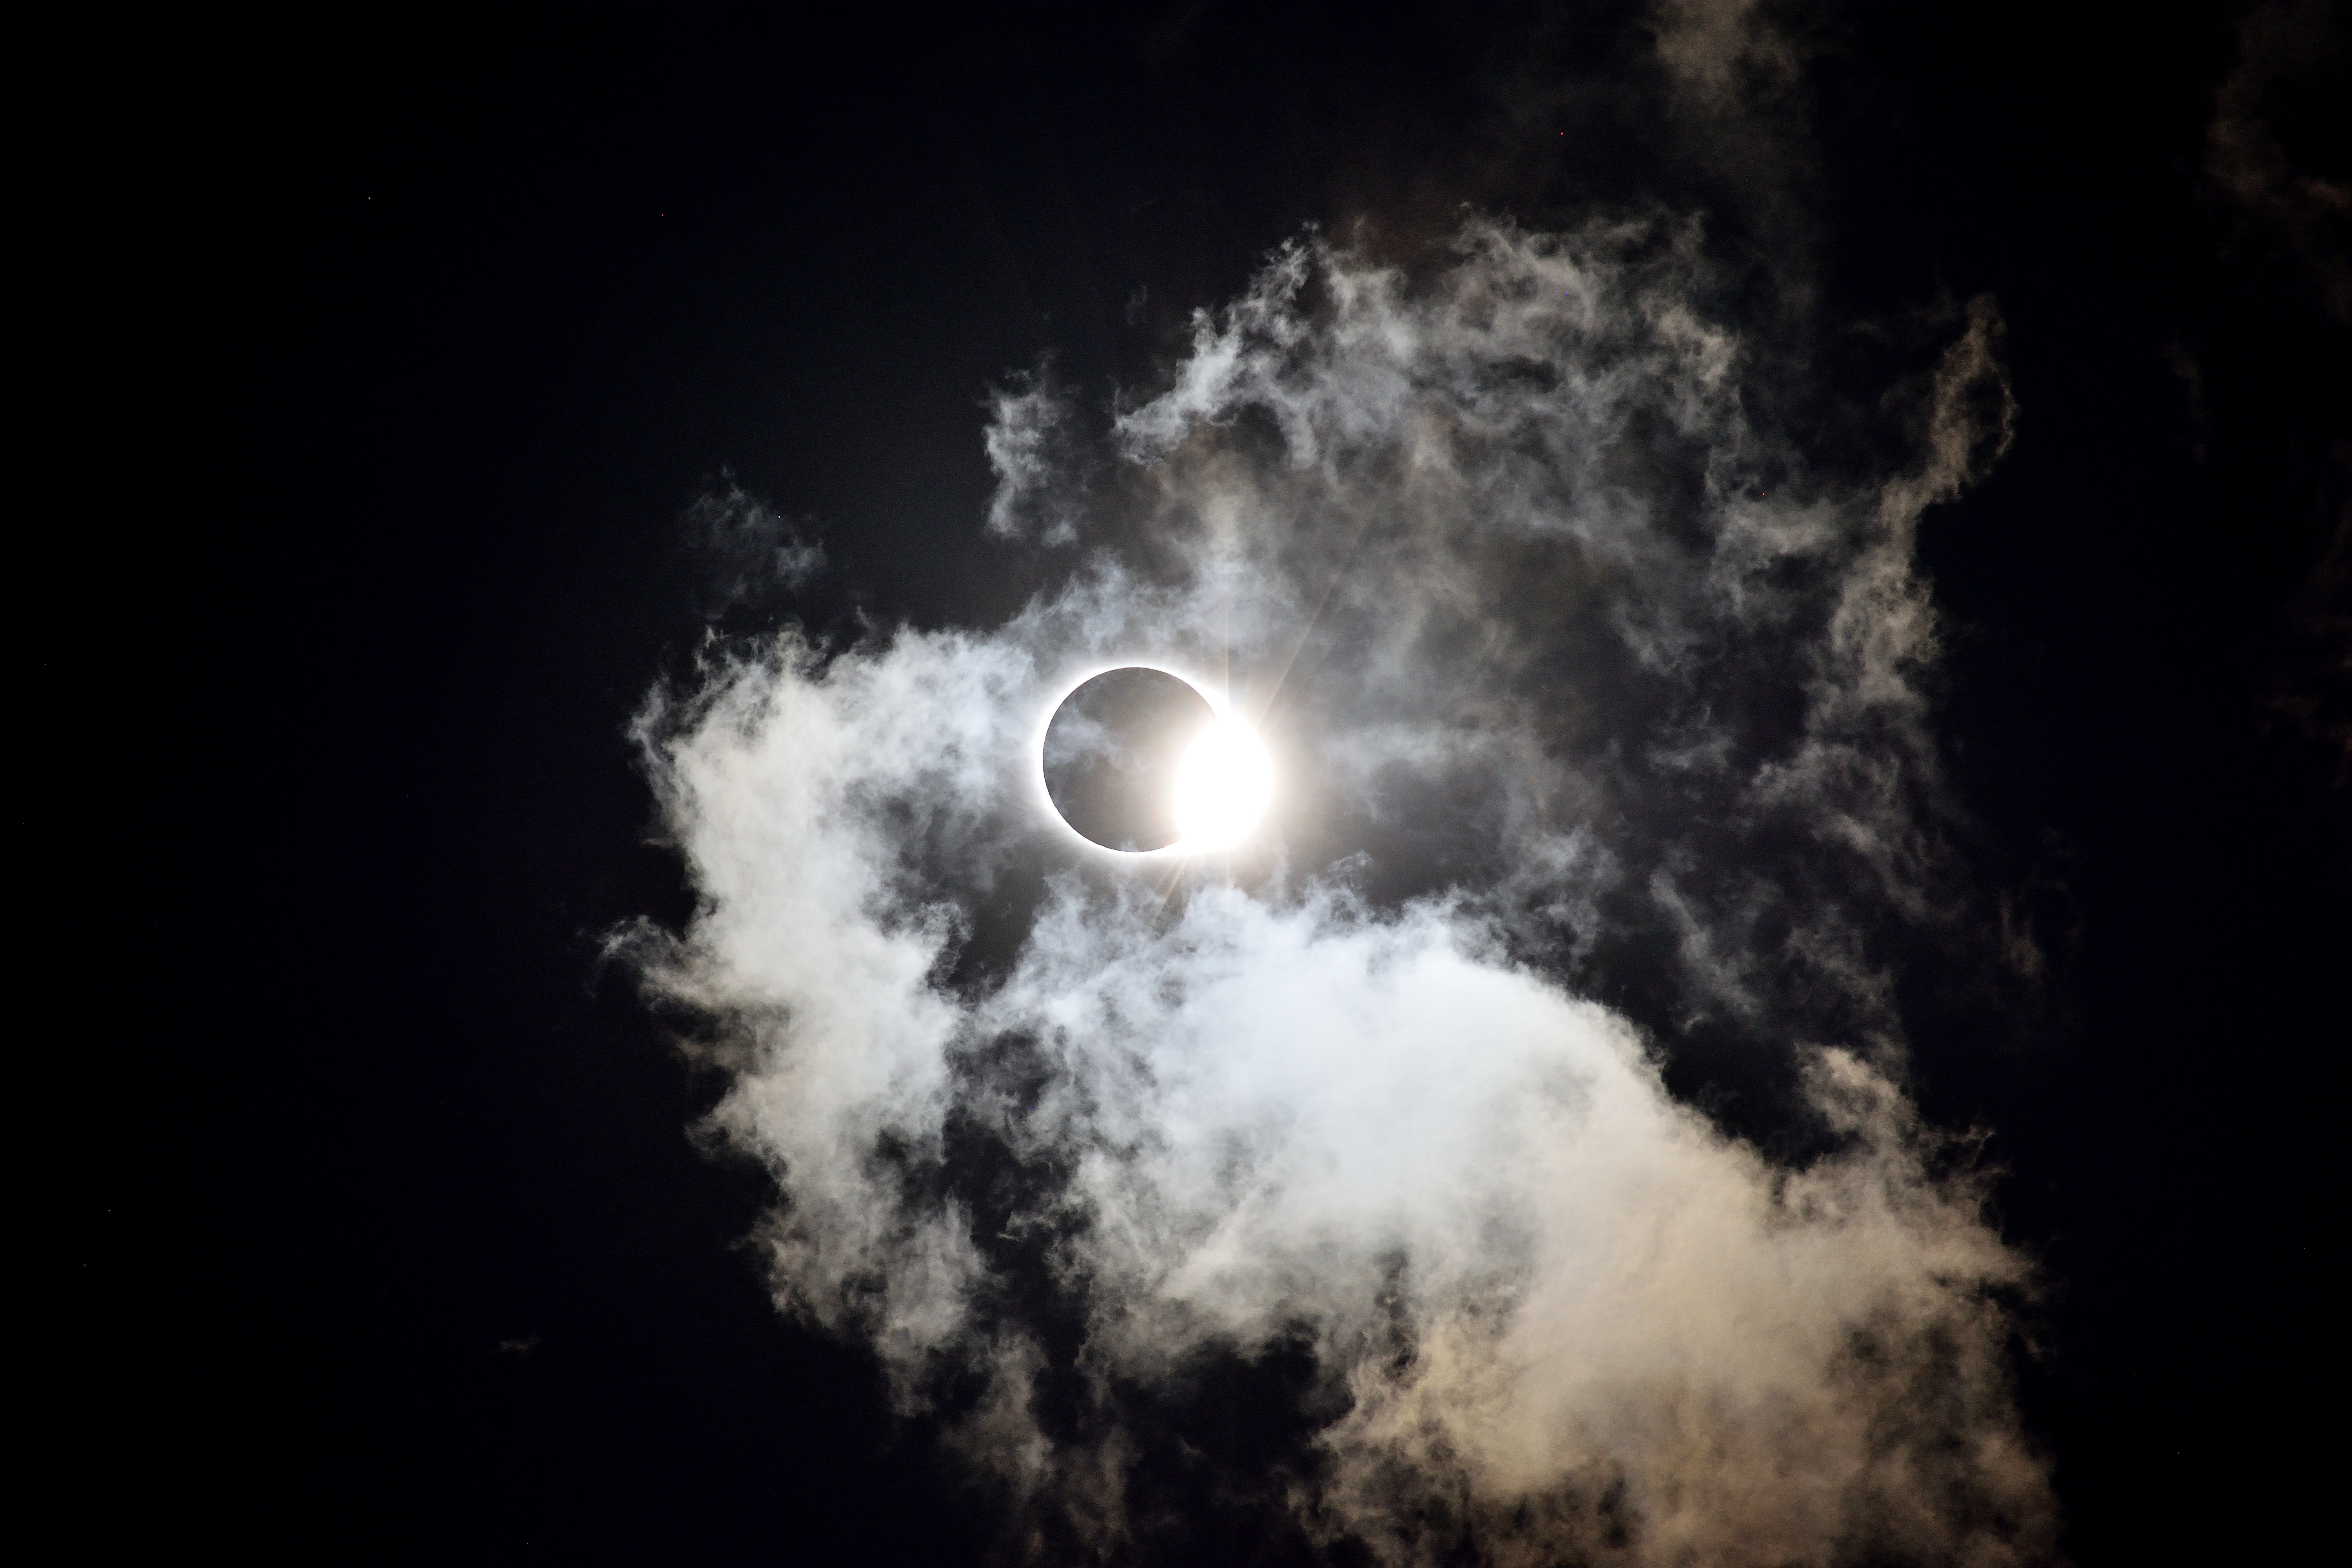 Don't miss the next total solar eclipse in Chile in 2020